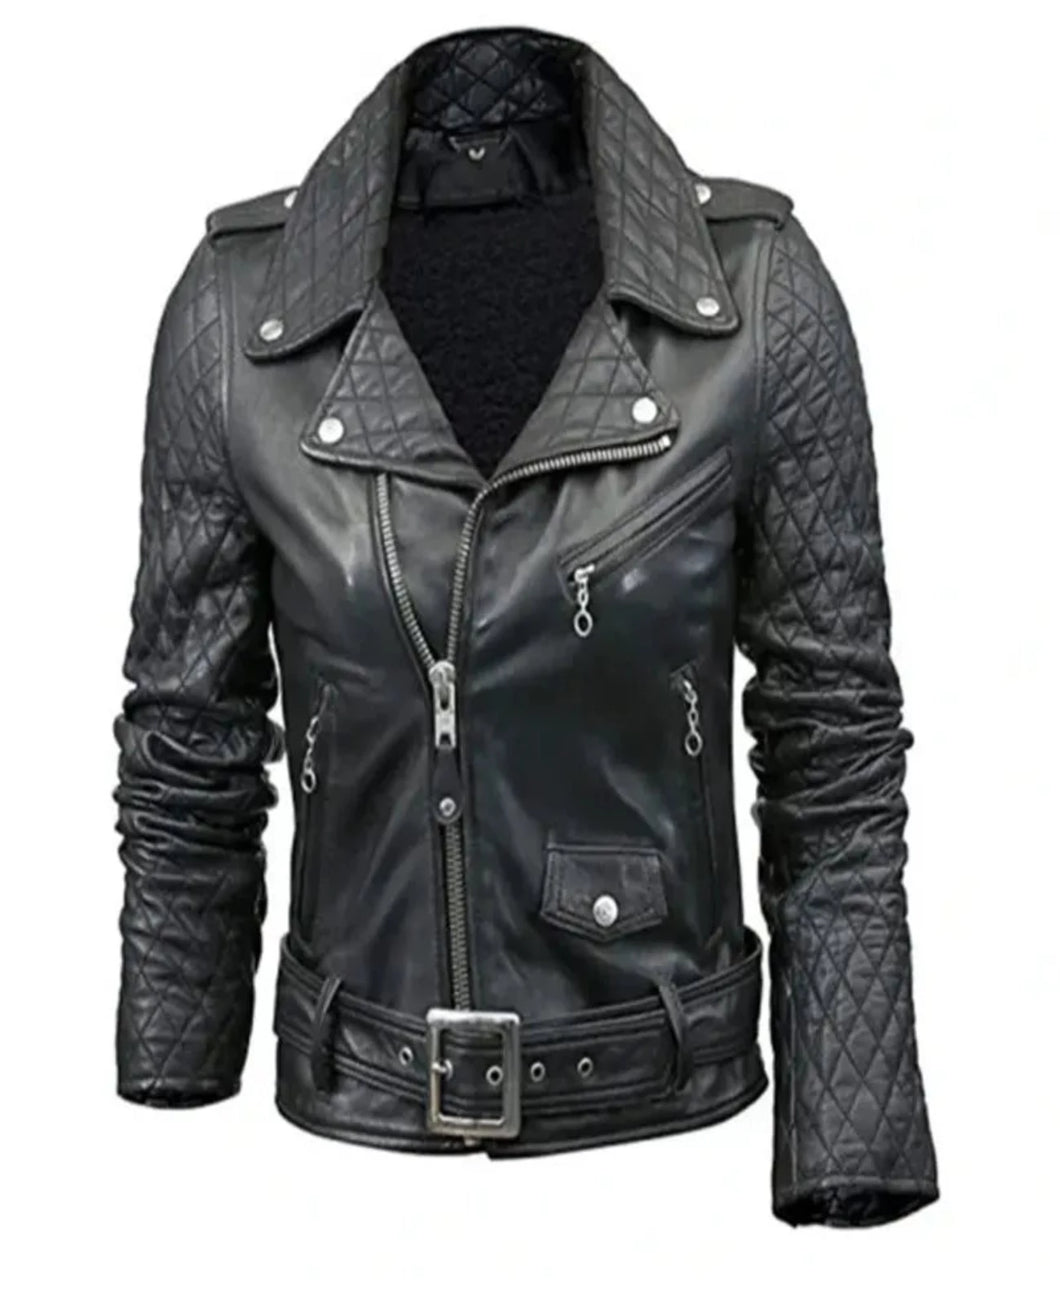 Women’s Dark Black Quilted Belted Leather Jacket